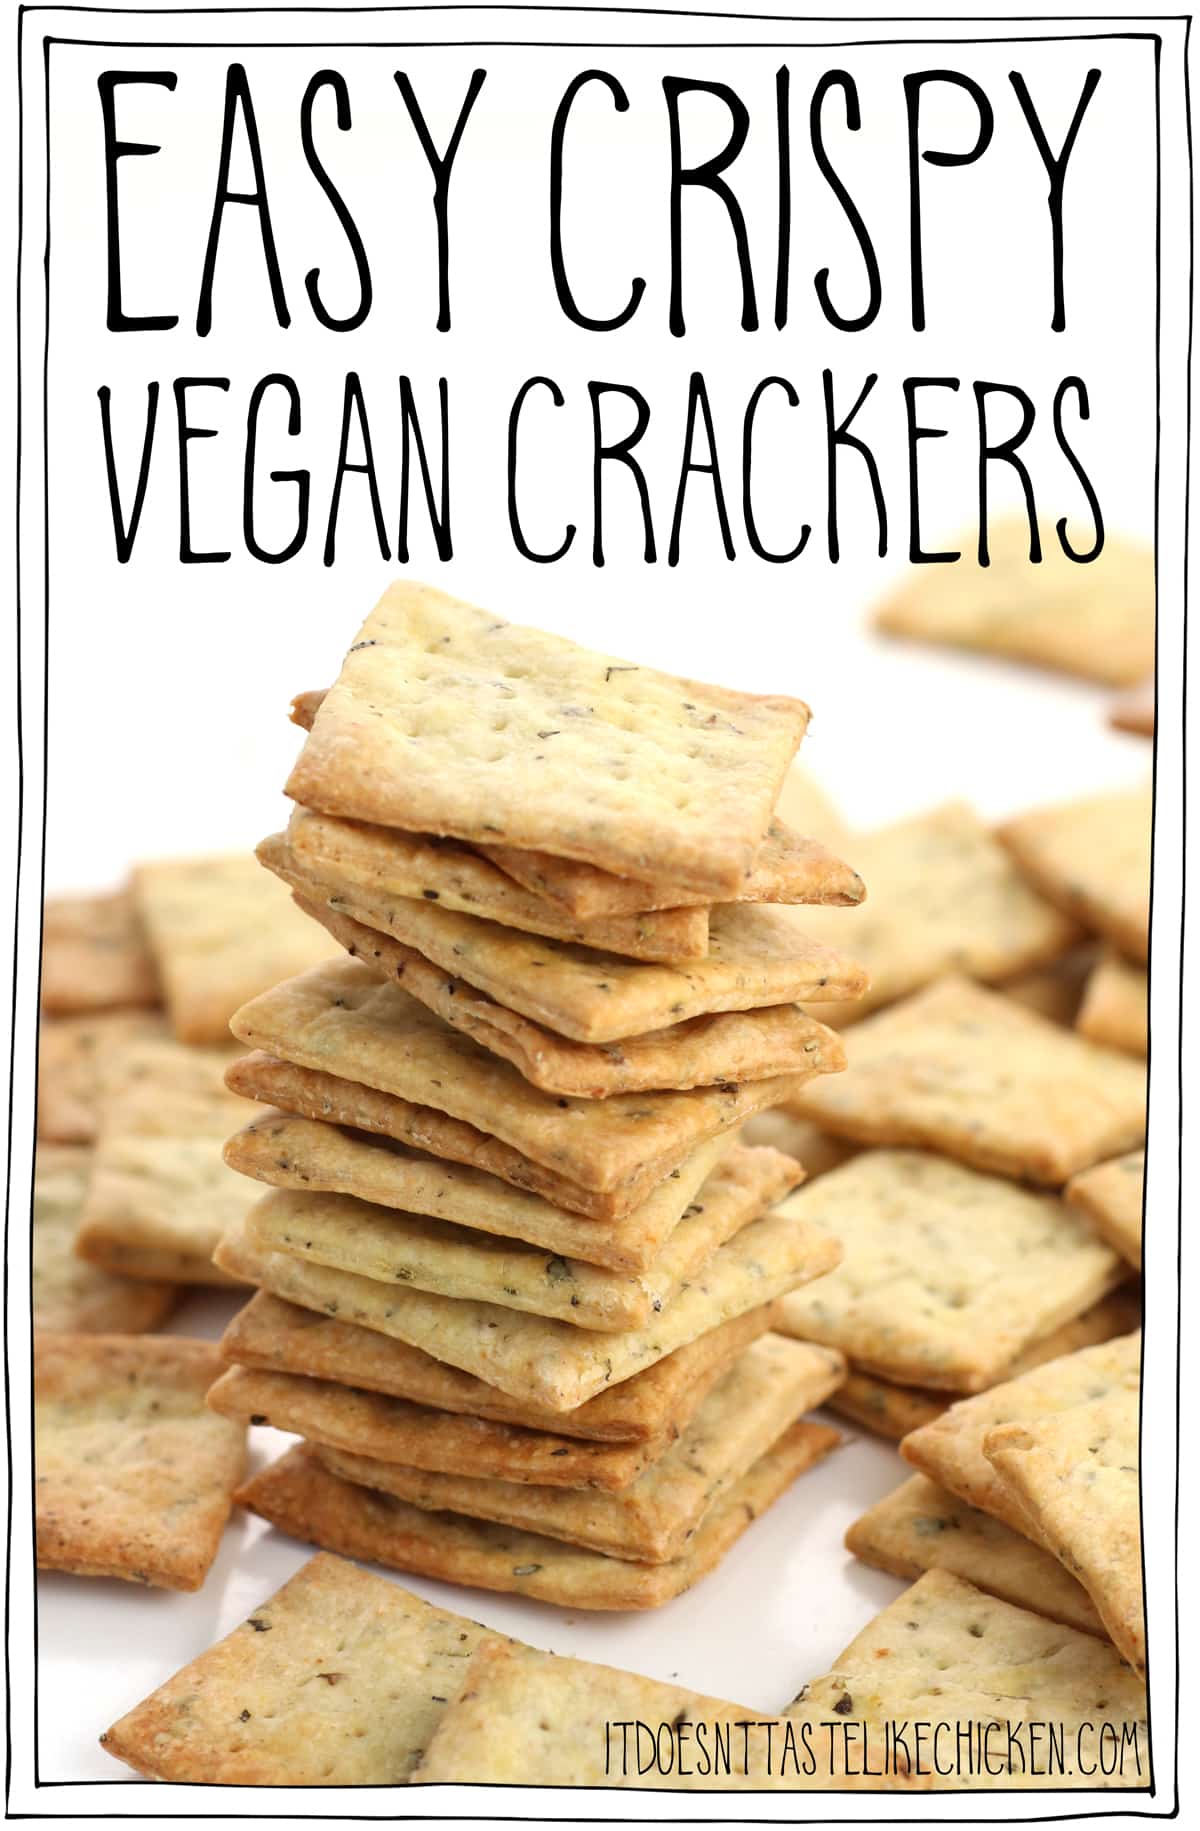 Easy Crispy Vegan Crackers! Just 9 ingredients to make these super crunchy crackers. Perfect for serving with your favourite vegan cheese, hummus, or any dip, or enjoy as a snack all on their own. #itdoesnttastelikechicken #veganrecipes #vegansnack